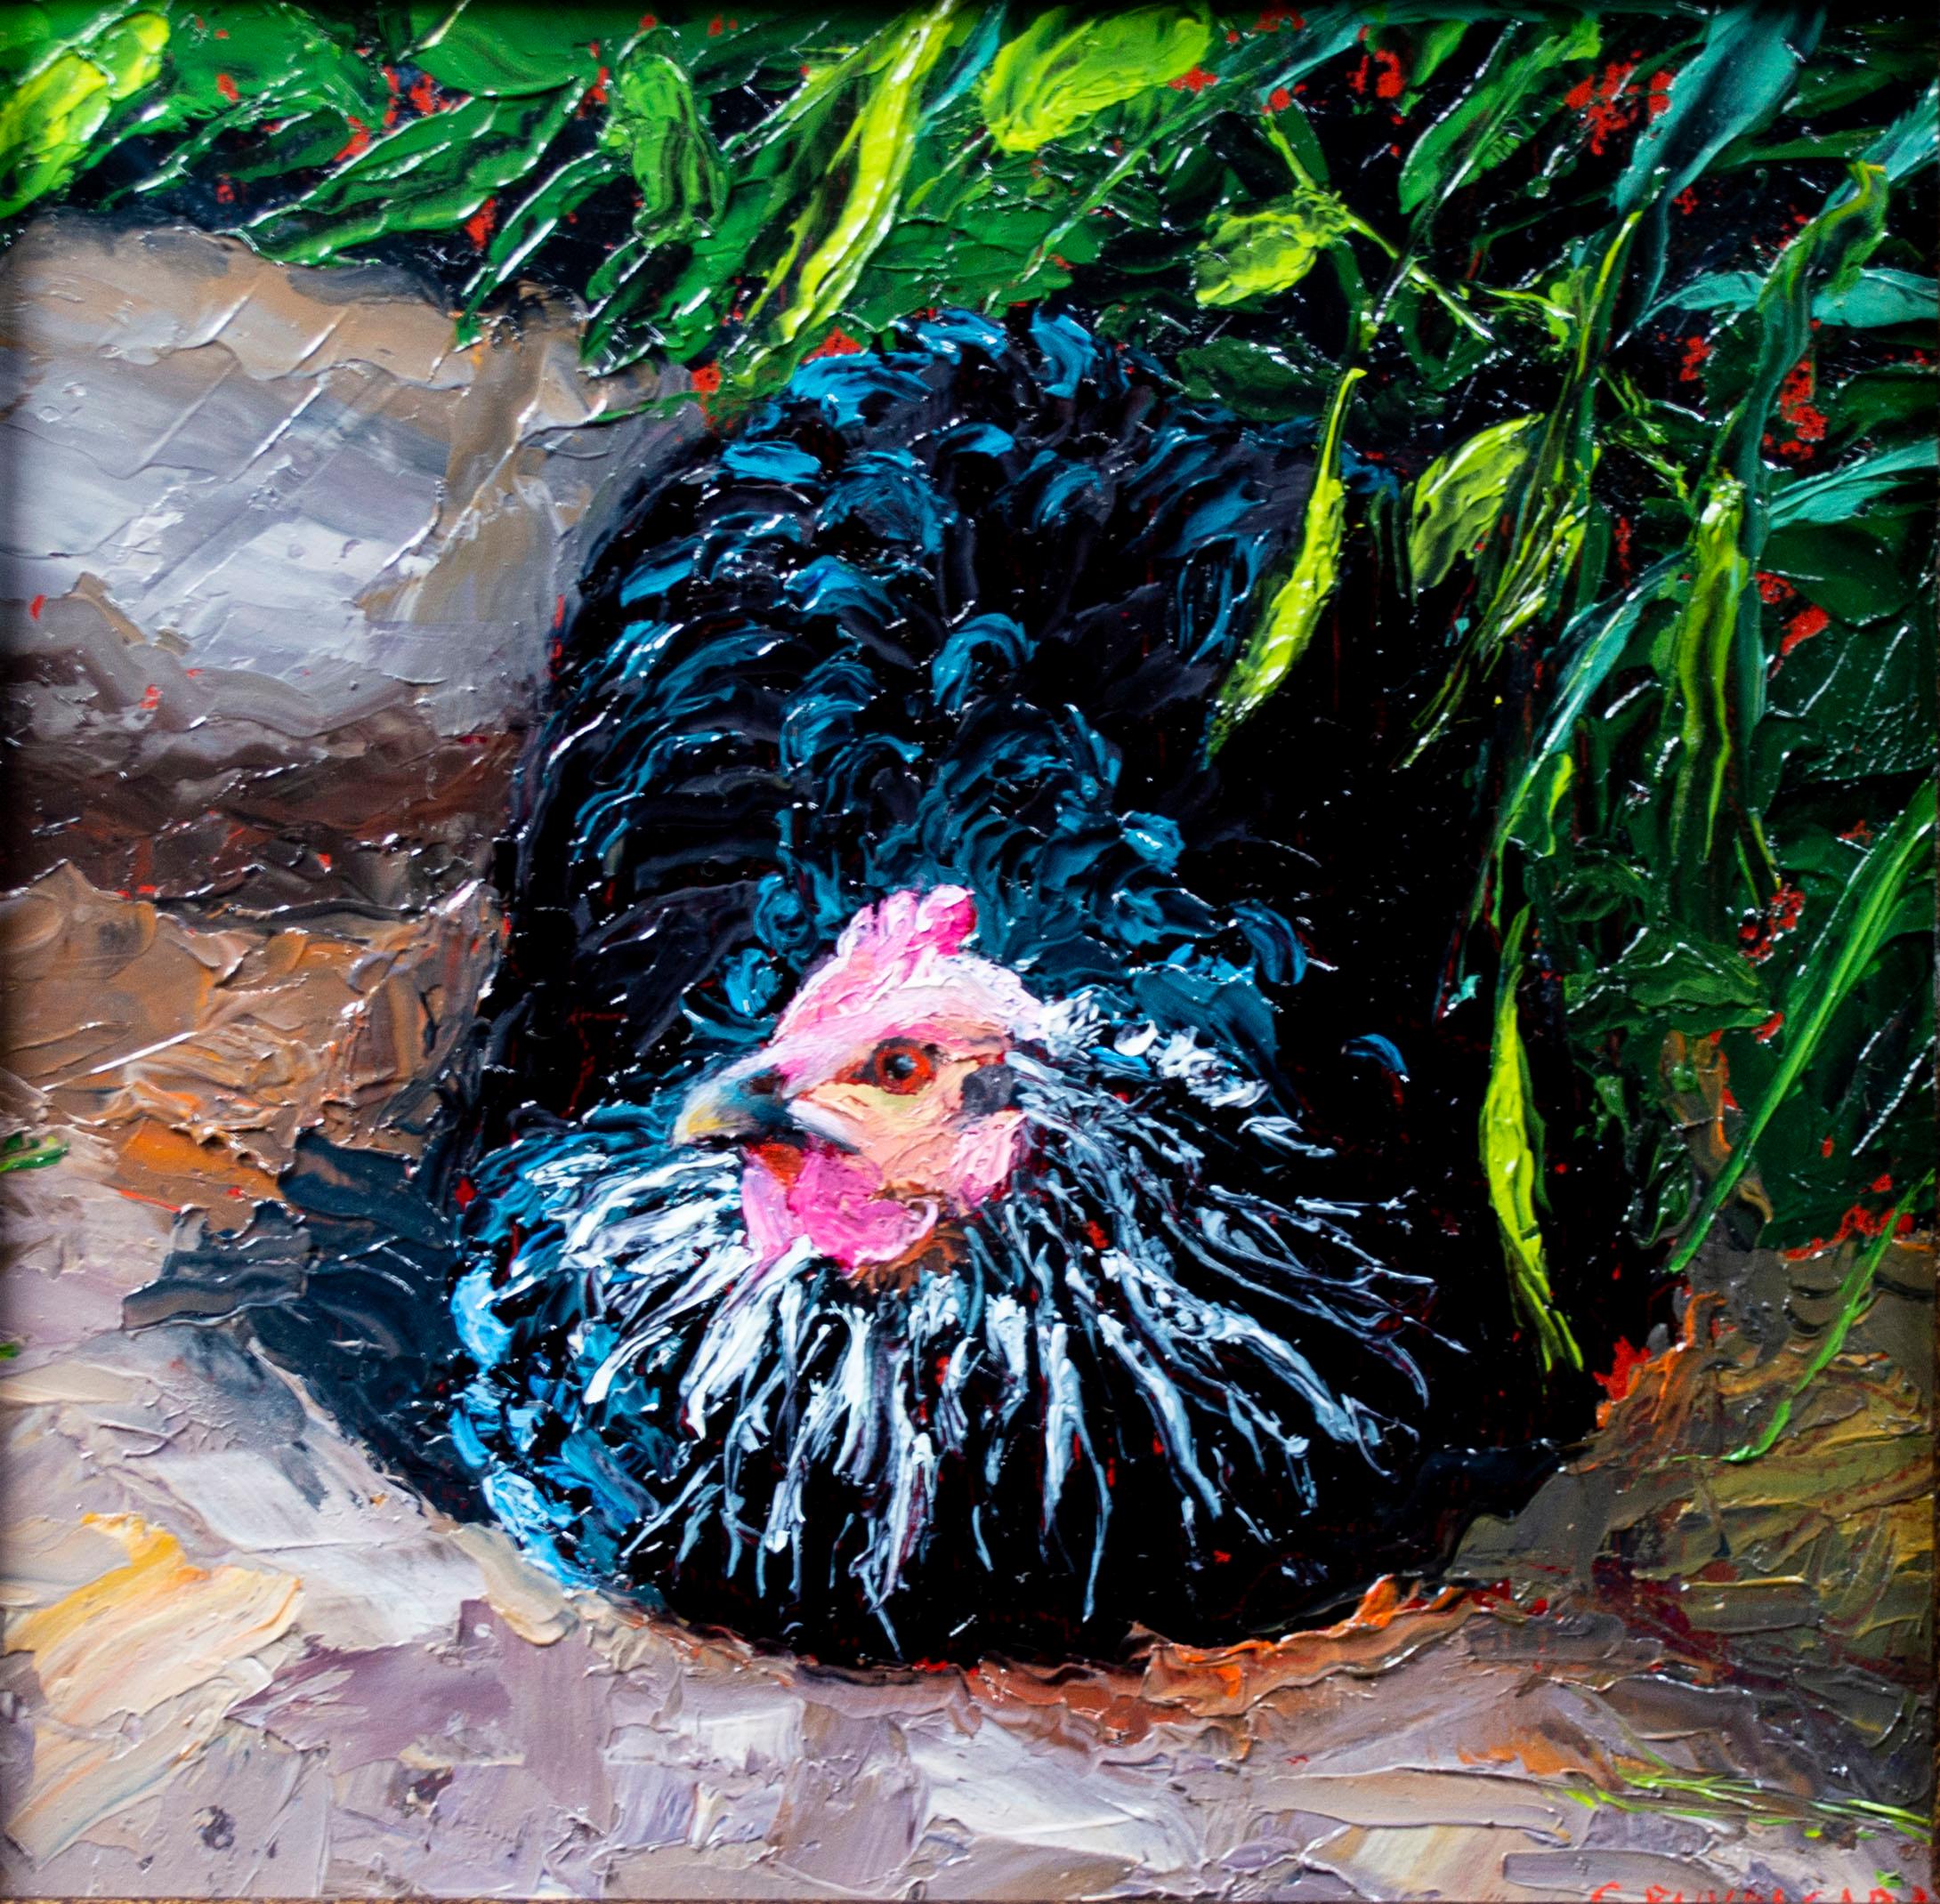 "Nesting" is an original oil painting by Cathryn Ruvalcaba. Here, she depicts a chicken nesting in a shady spot among rocks and dirt, with green shoots of grass covering the bird overhead. Cathryn paints in the Russian Impressionistic style with